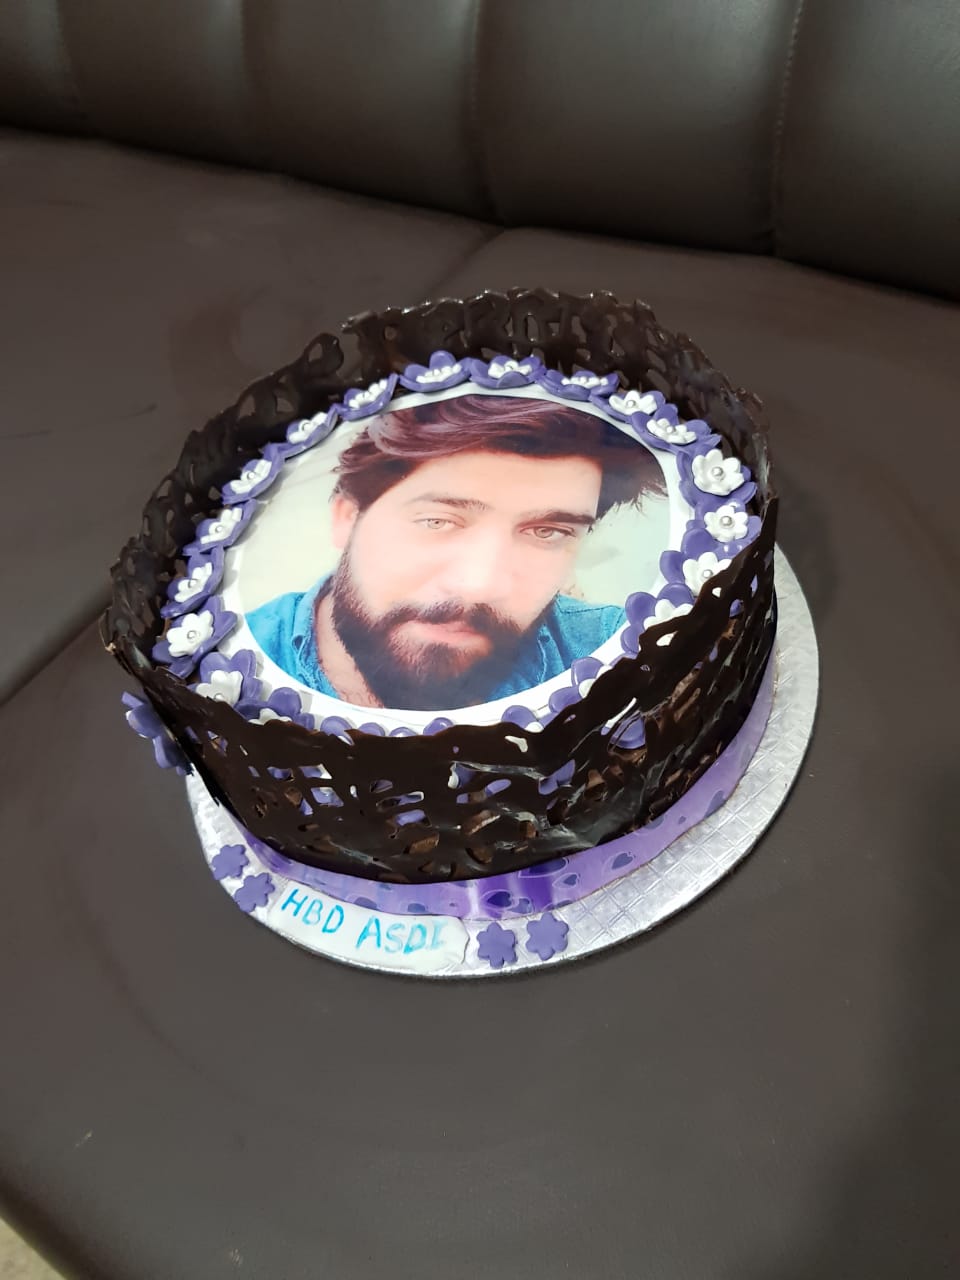 Get the best deal of edible picture cake